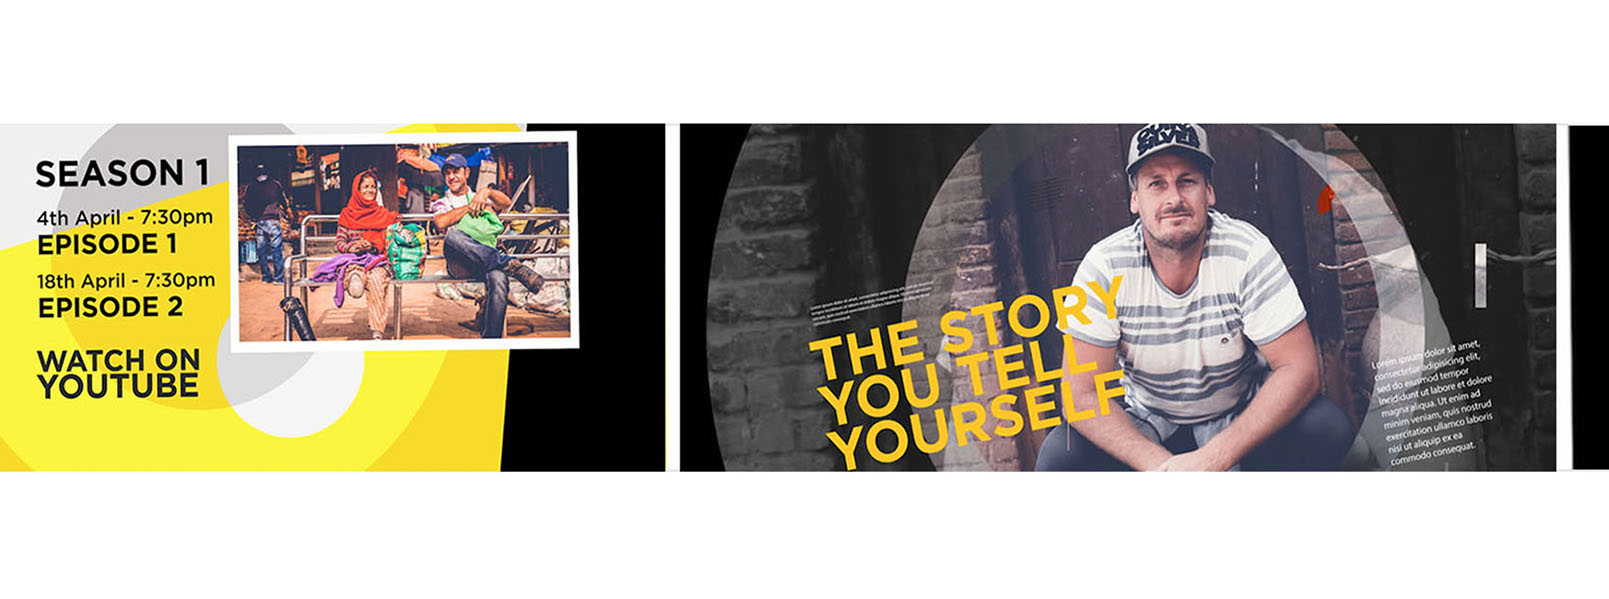 The Story you tell yourself